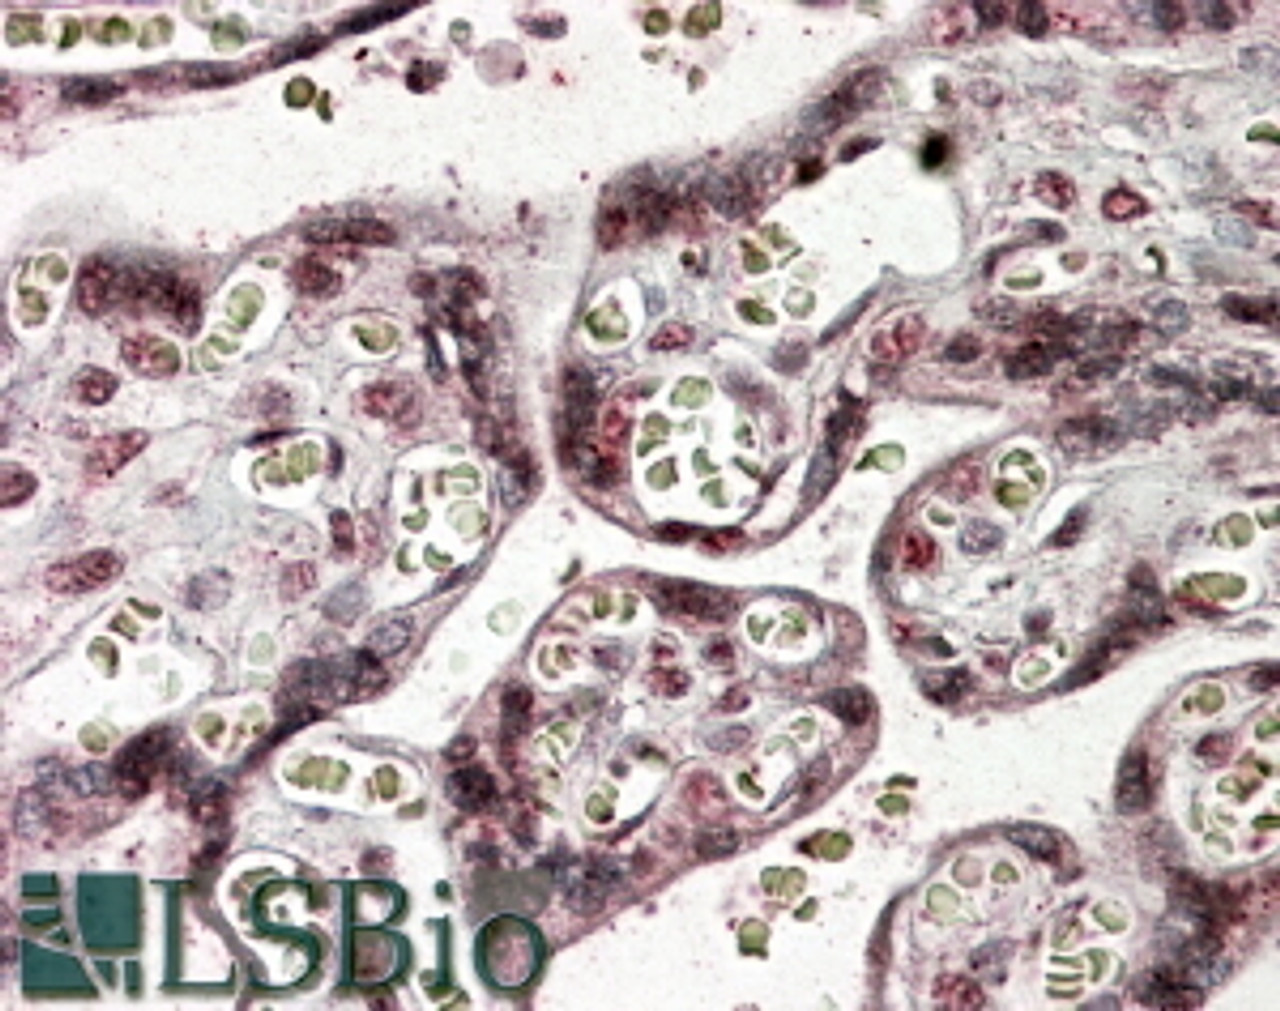 45-964 (3.8ug/ml) staining of paraffin embedded Human Placenta. Steamed antigen retrieval with citrate buffer pH 6, AP-staining.